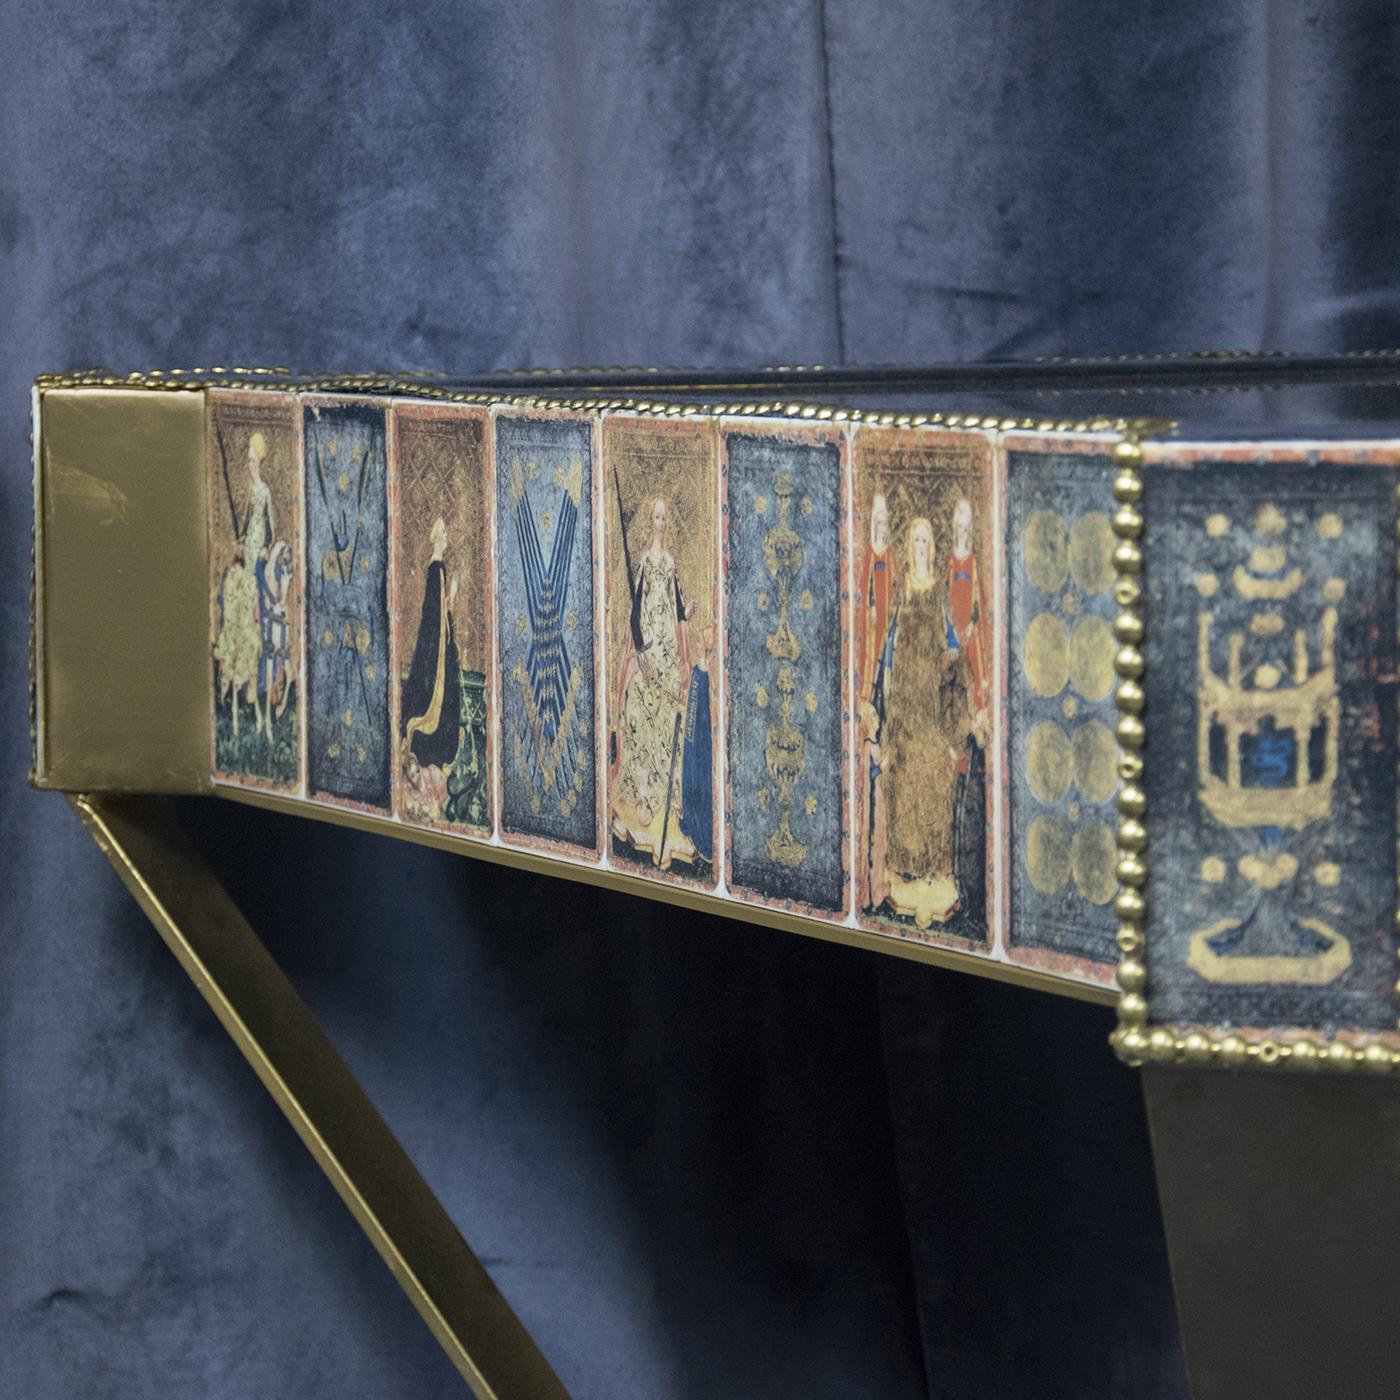 Conceived, designed, and brought to life by architect Paola Maria Russo, this superb table draws inspiration from the medieval tarot cards from Visconti di Modrone. The surface boasts a golden mirror and polished edge in blue velvet, while the sides